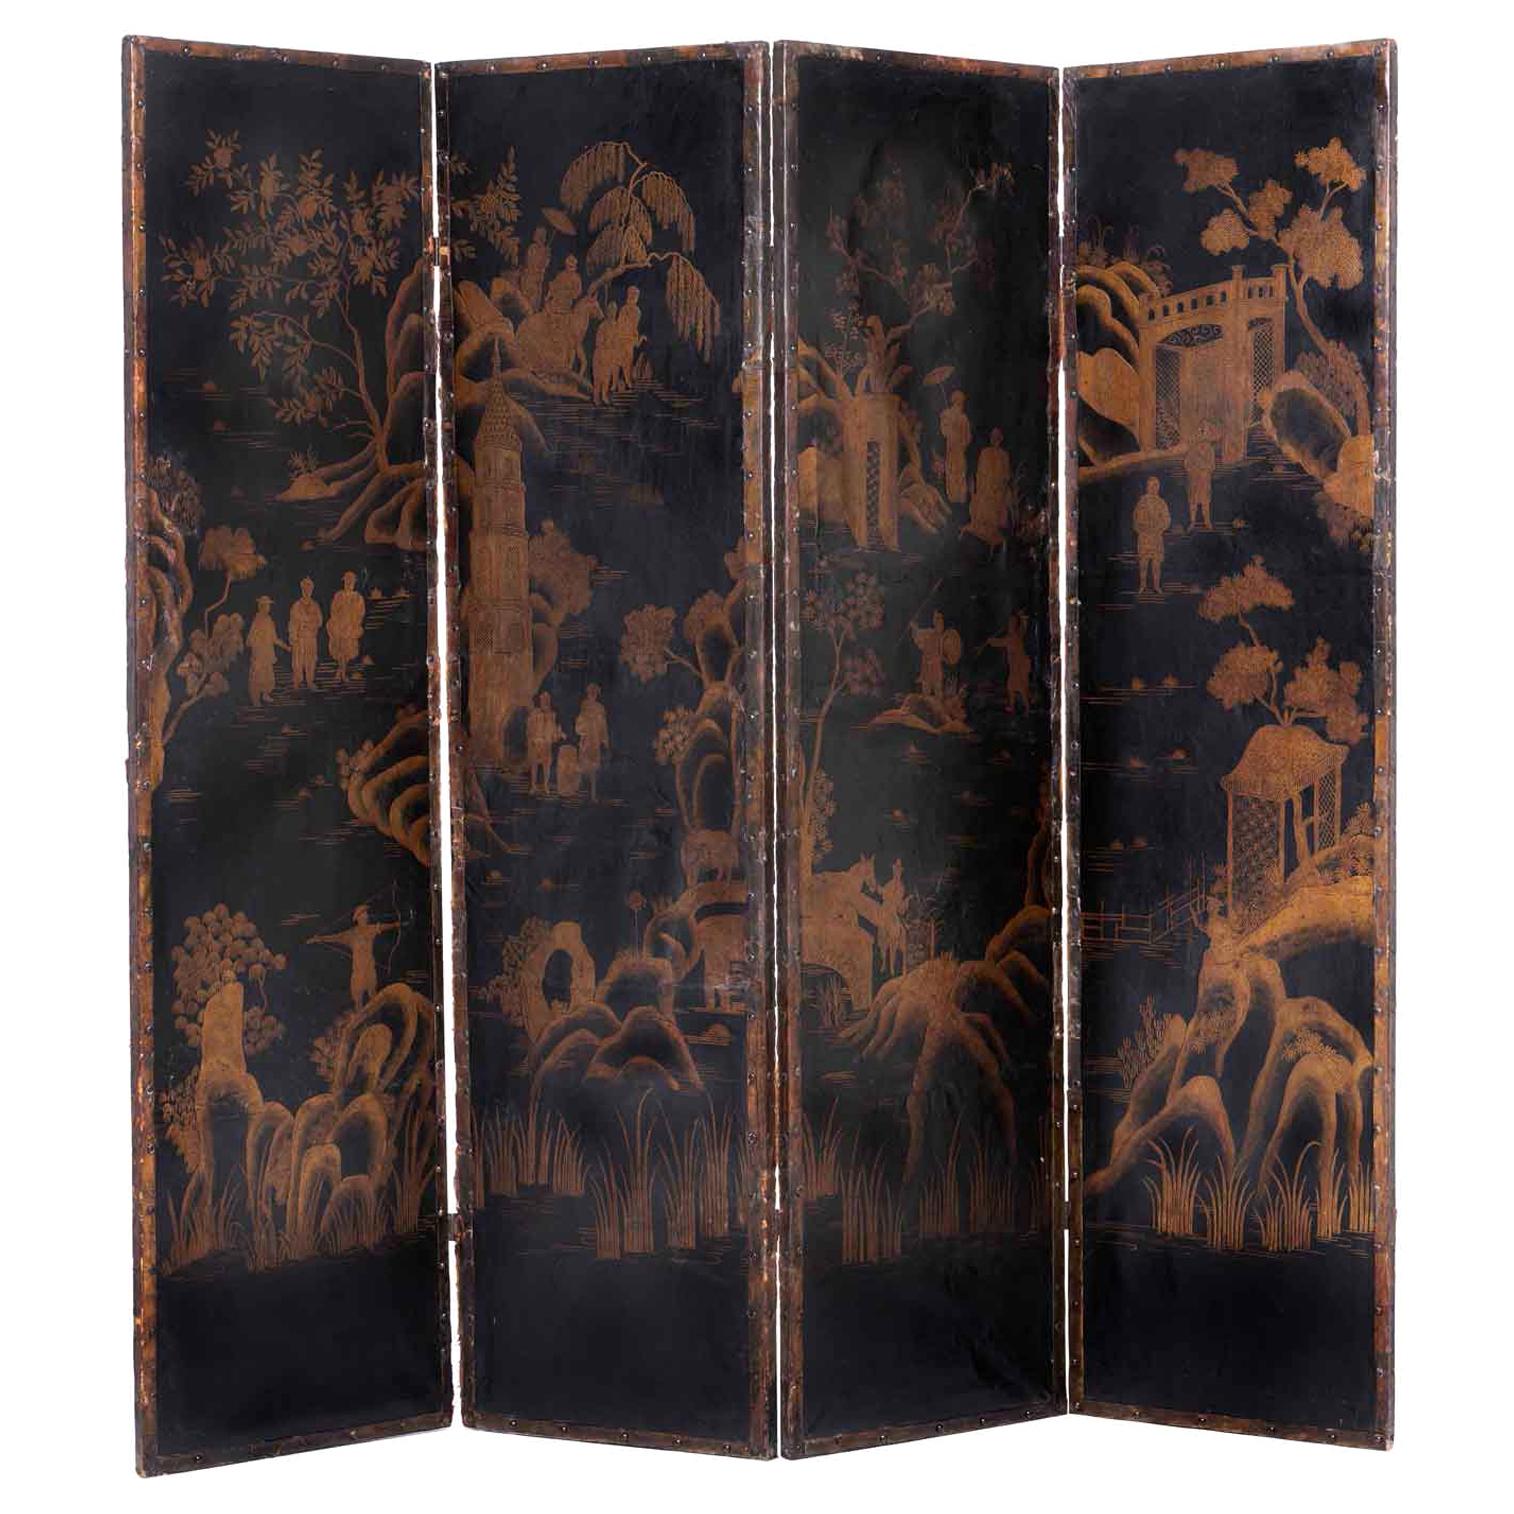 Early 19th Century Italian Screen Four Fold Black Leather Chinoiserie Decoration